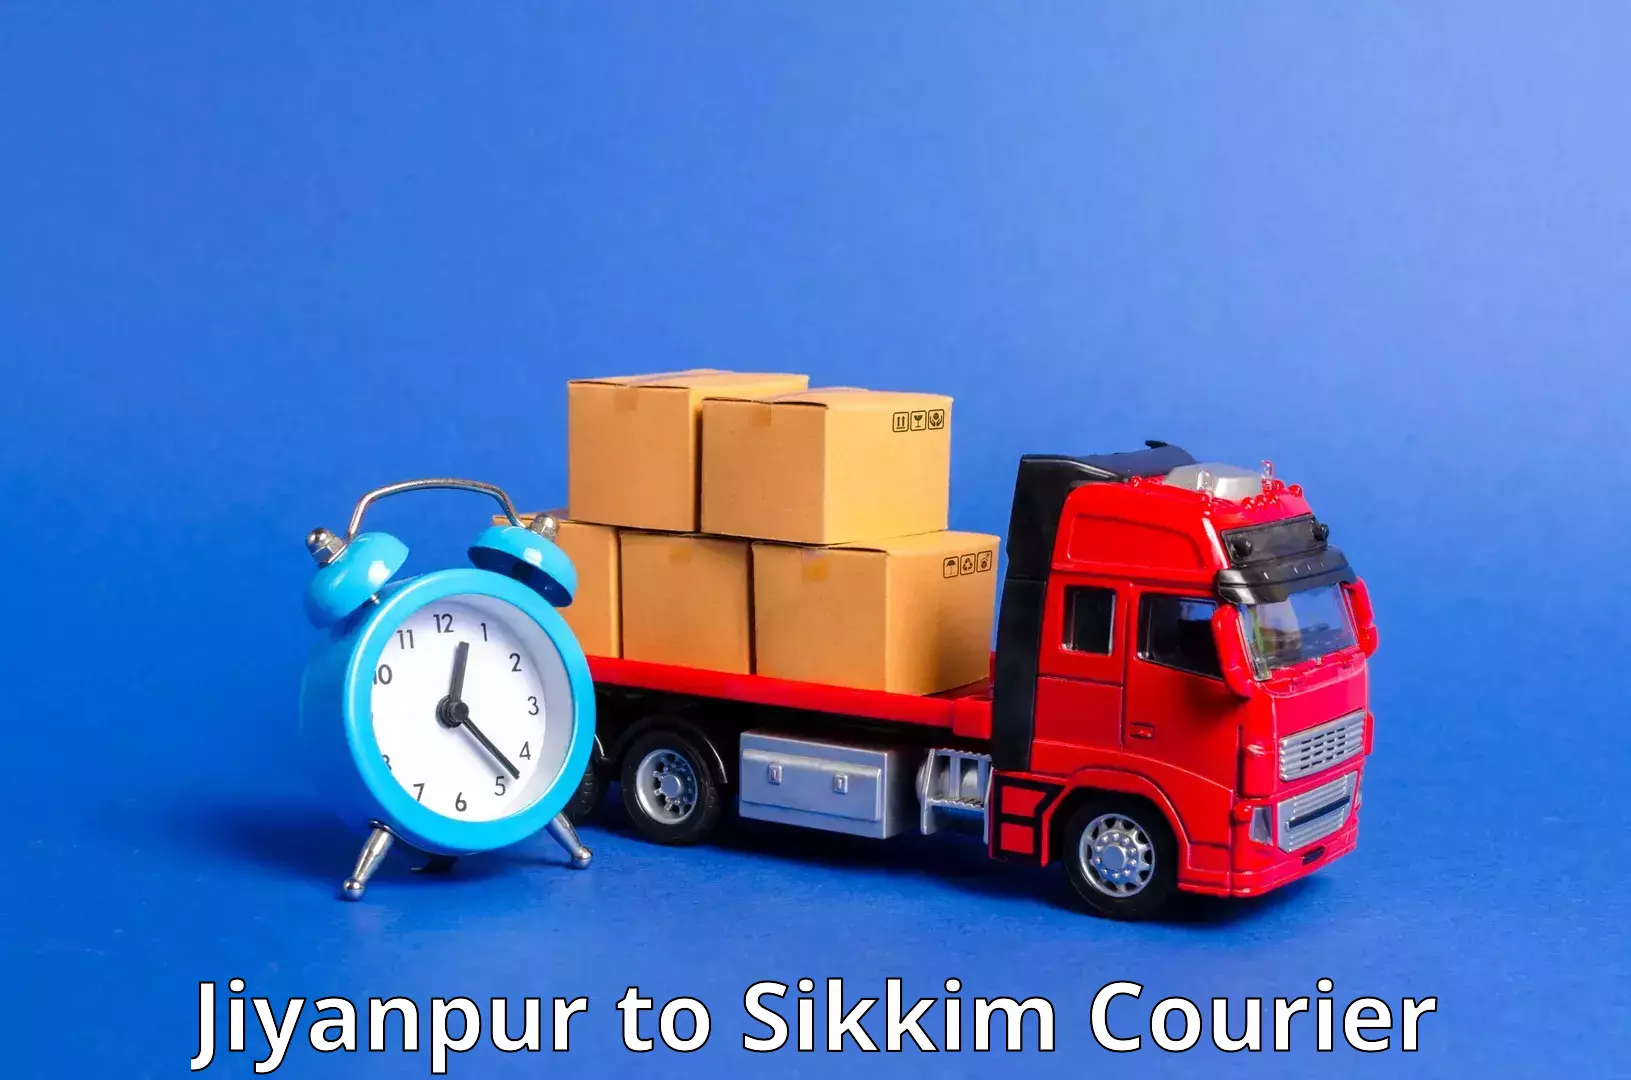 Supply chain efficiency in Jiyanpur to South Sikkim